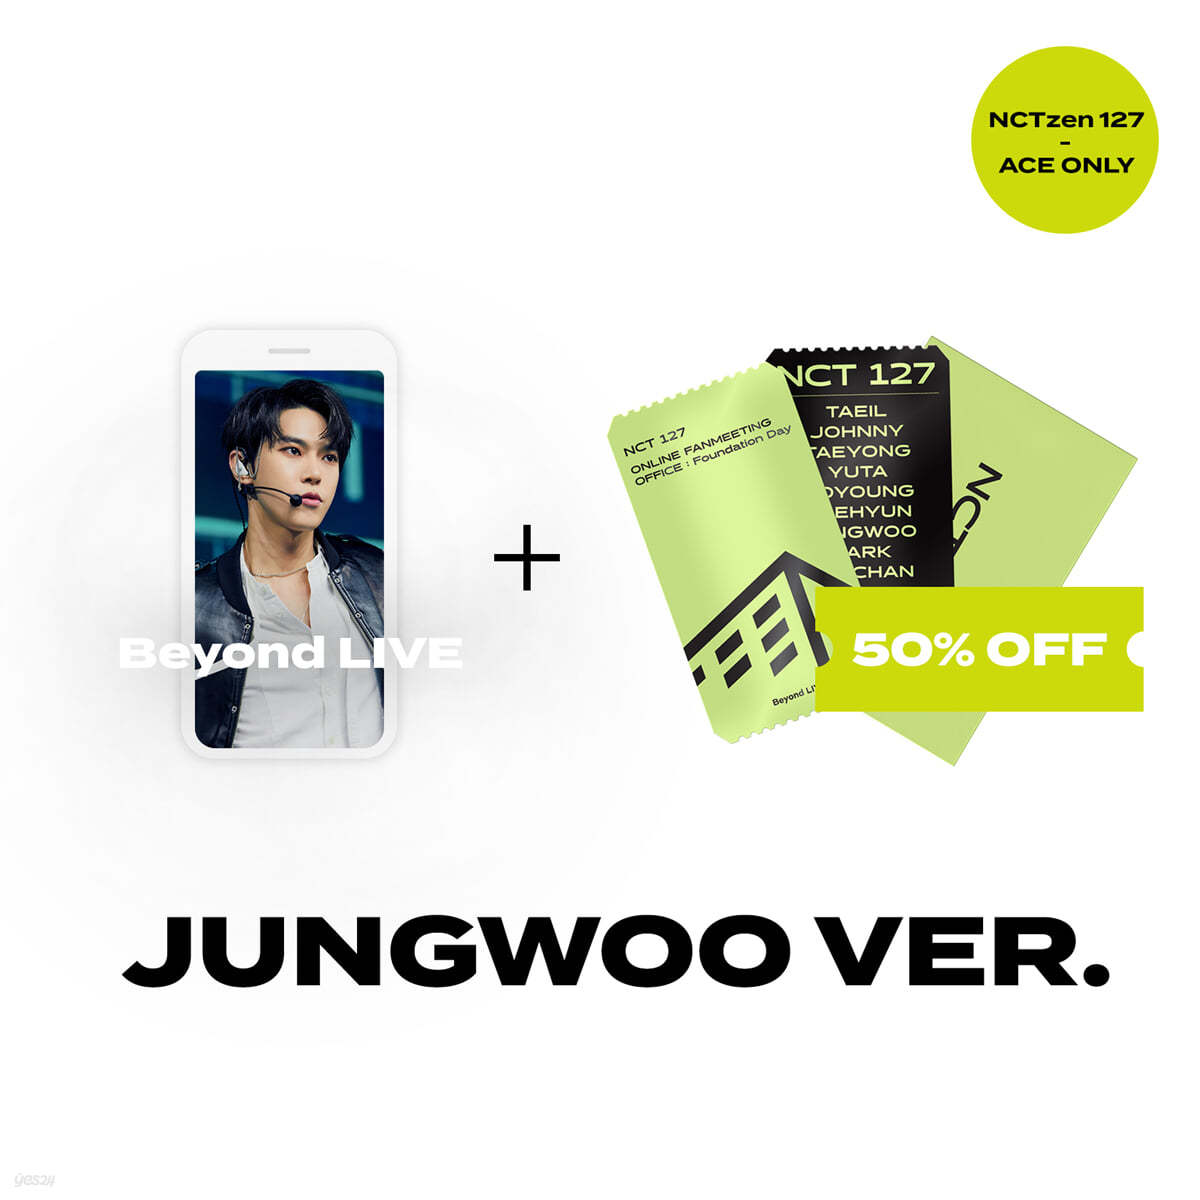 [NCTzen 127 ACE ONLY] [JUNGWOO] Beyond LIVE 관람권 + SPECIAL AR TICKET SET Beyond LIVE - NCT 127 ONLINE FANMEETING 'OFFICE : Foundation Day'